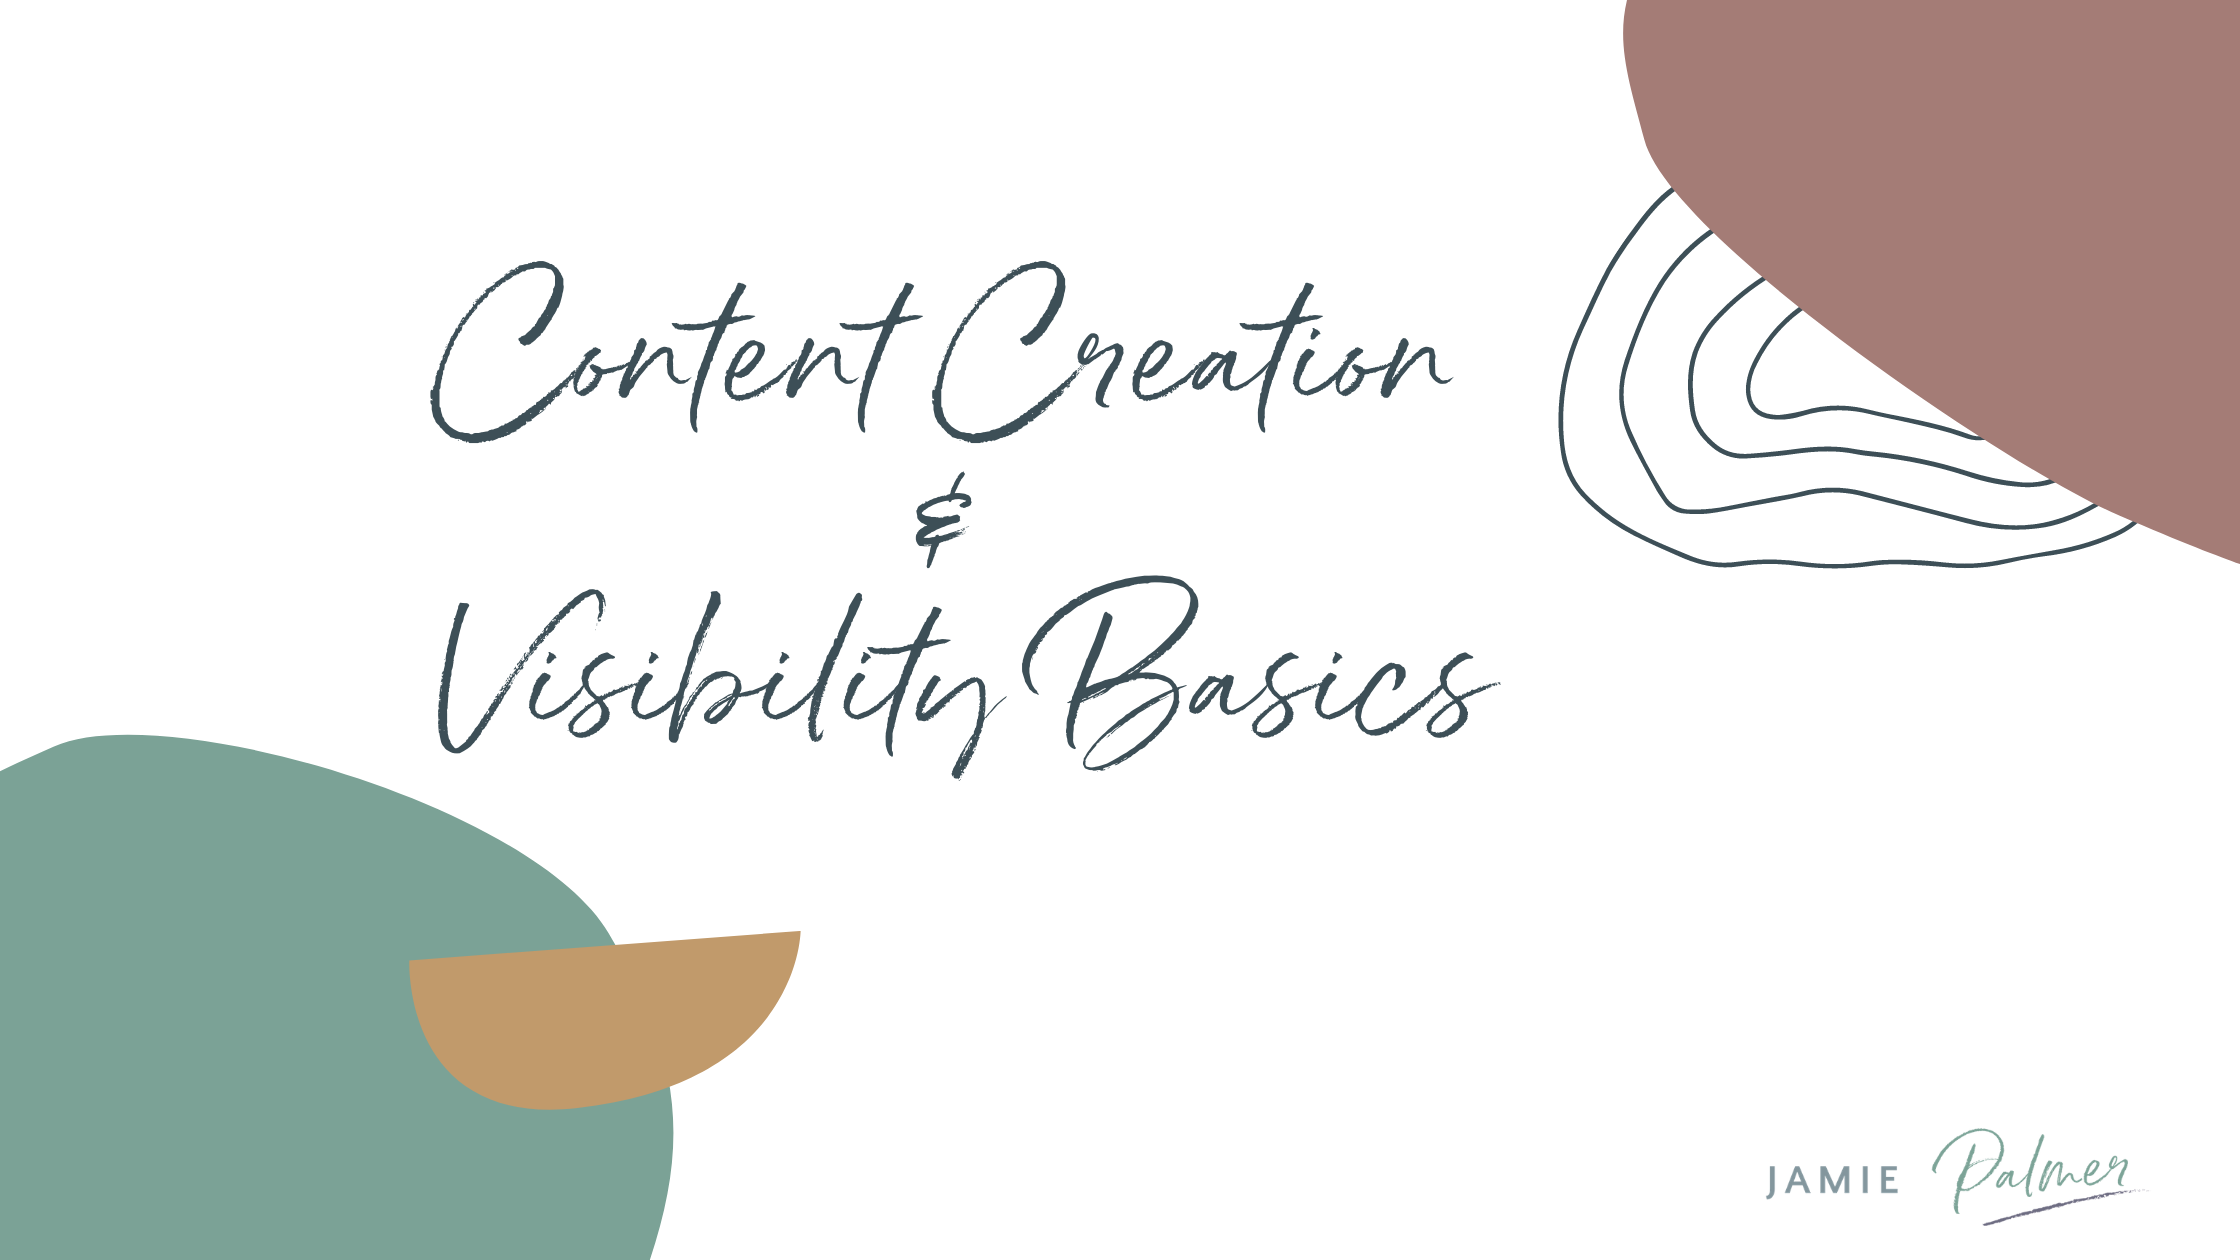 Content Creation and Visibility Basics blog